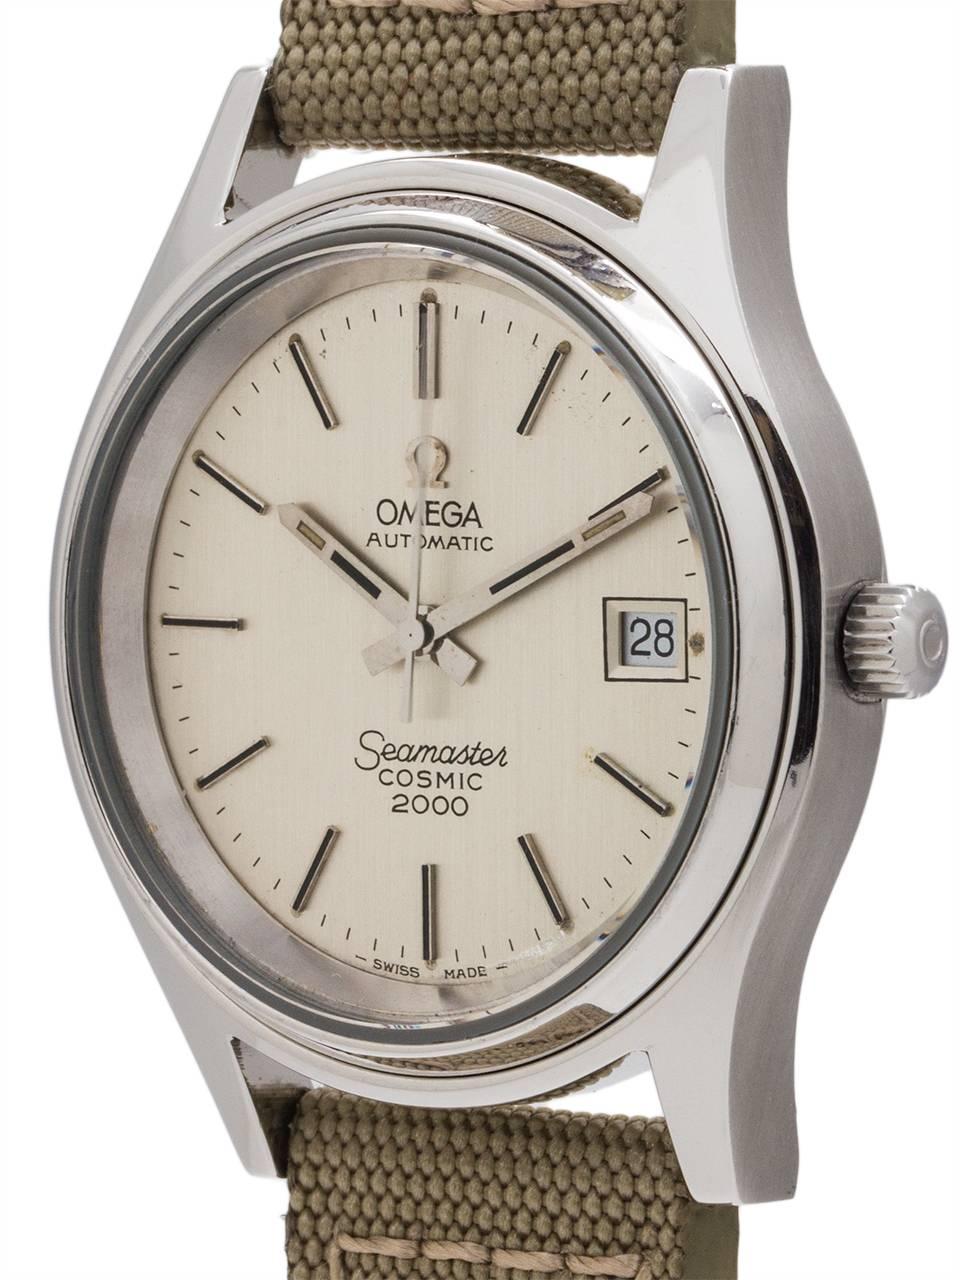 
Vintage Omega Seamaster Cosmic 2000 ref 166.128 circa 1972. Featuring a wonderful oversized 38mm diameter stainless steel case with mineral glass crystal, and original silver satin dial in great condition with applied silver indexes and silver